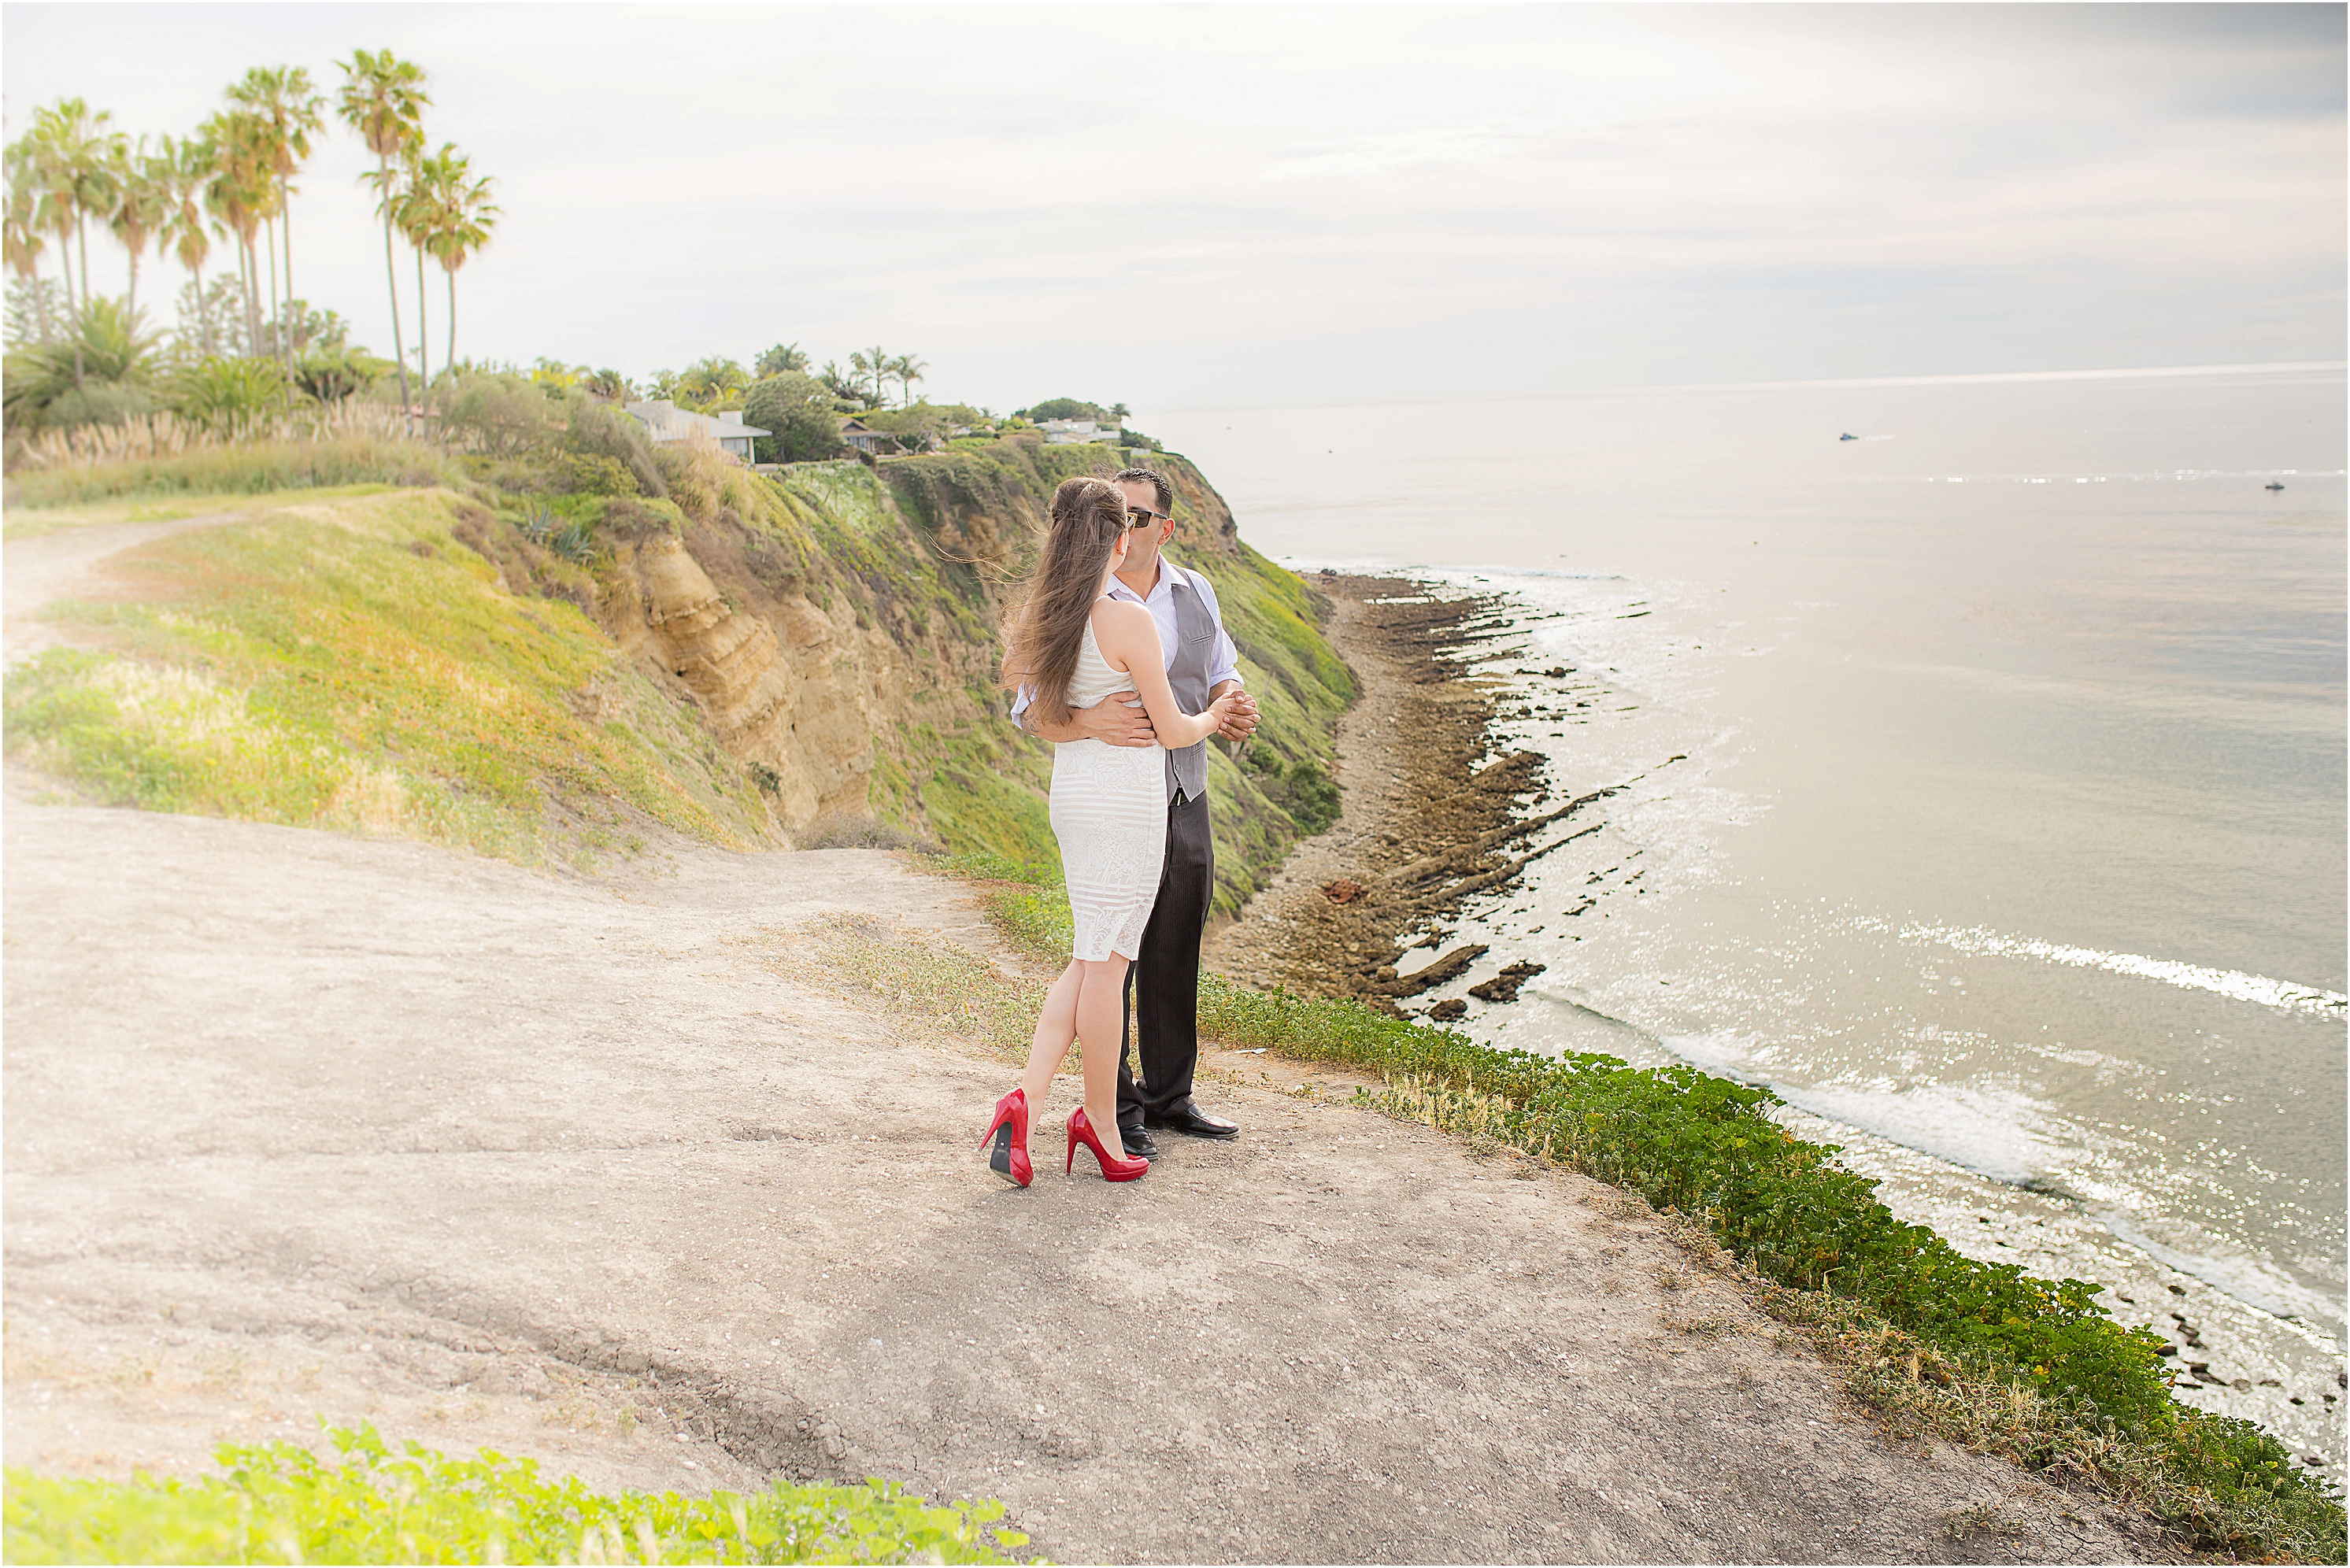 Palos Vedes Cliffs are a great spot for engagement photos